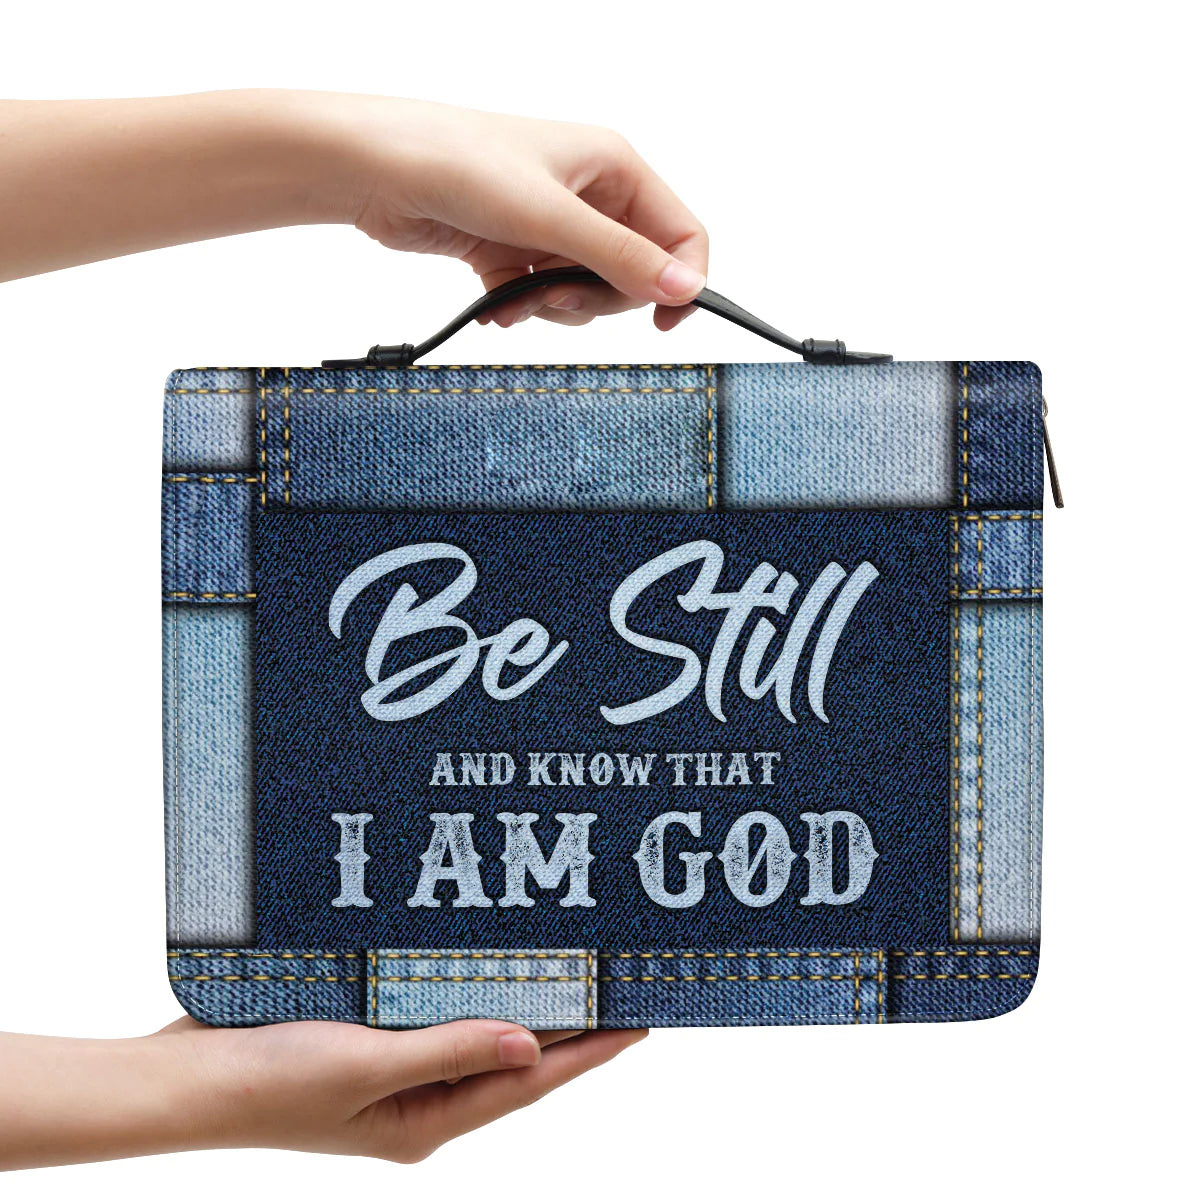 Christianart Bible Cover, Be Still And Know That I Am God, Personalized Gifts for Pastor, Gifts For Women, Gifts For Men. - Christian Art Bag